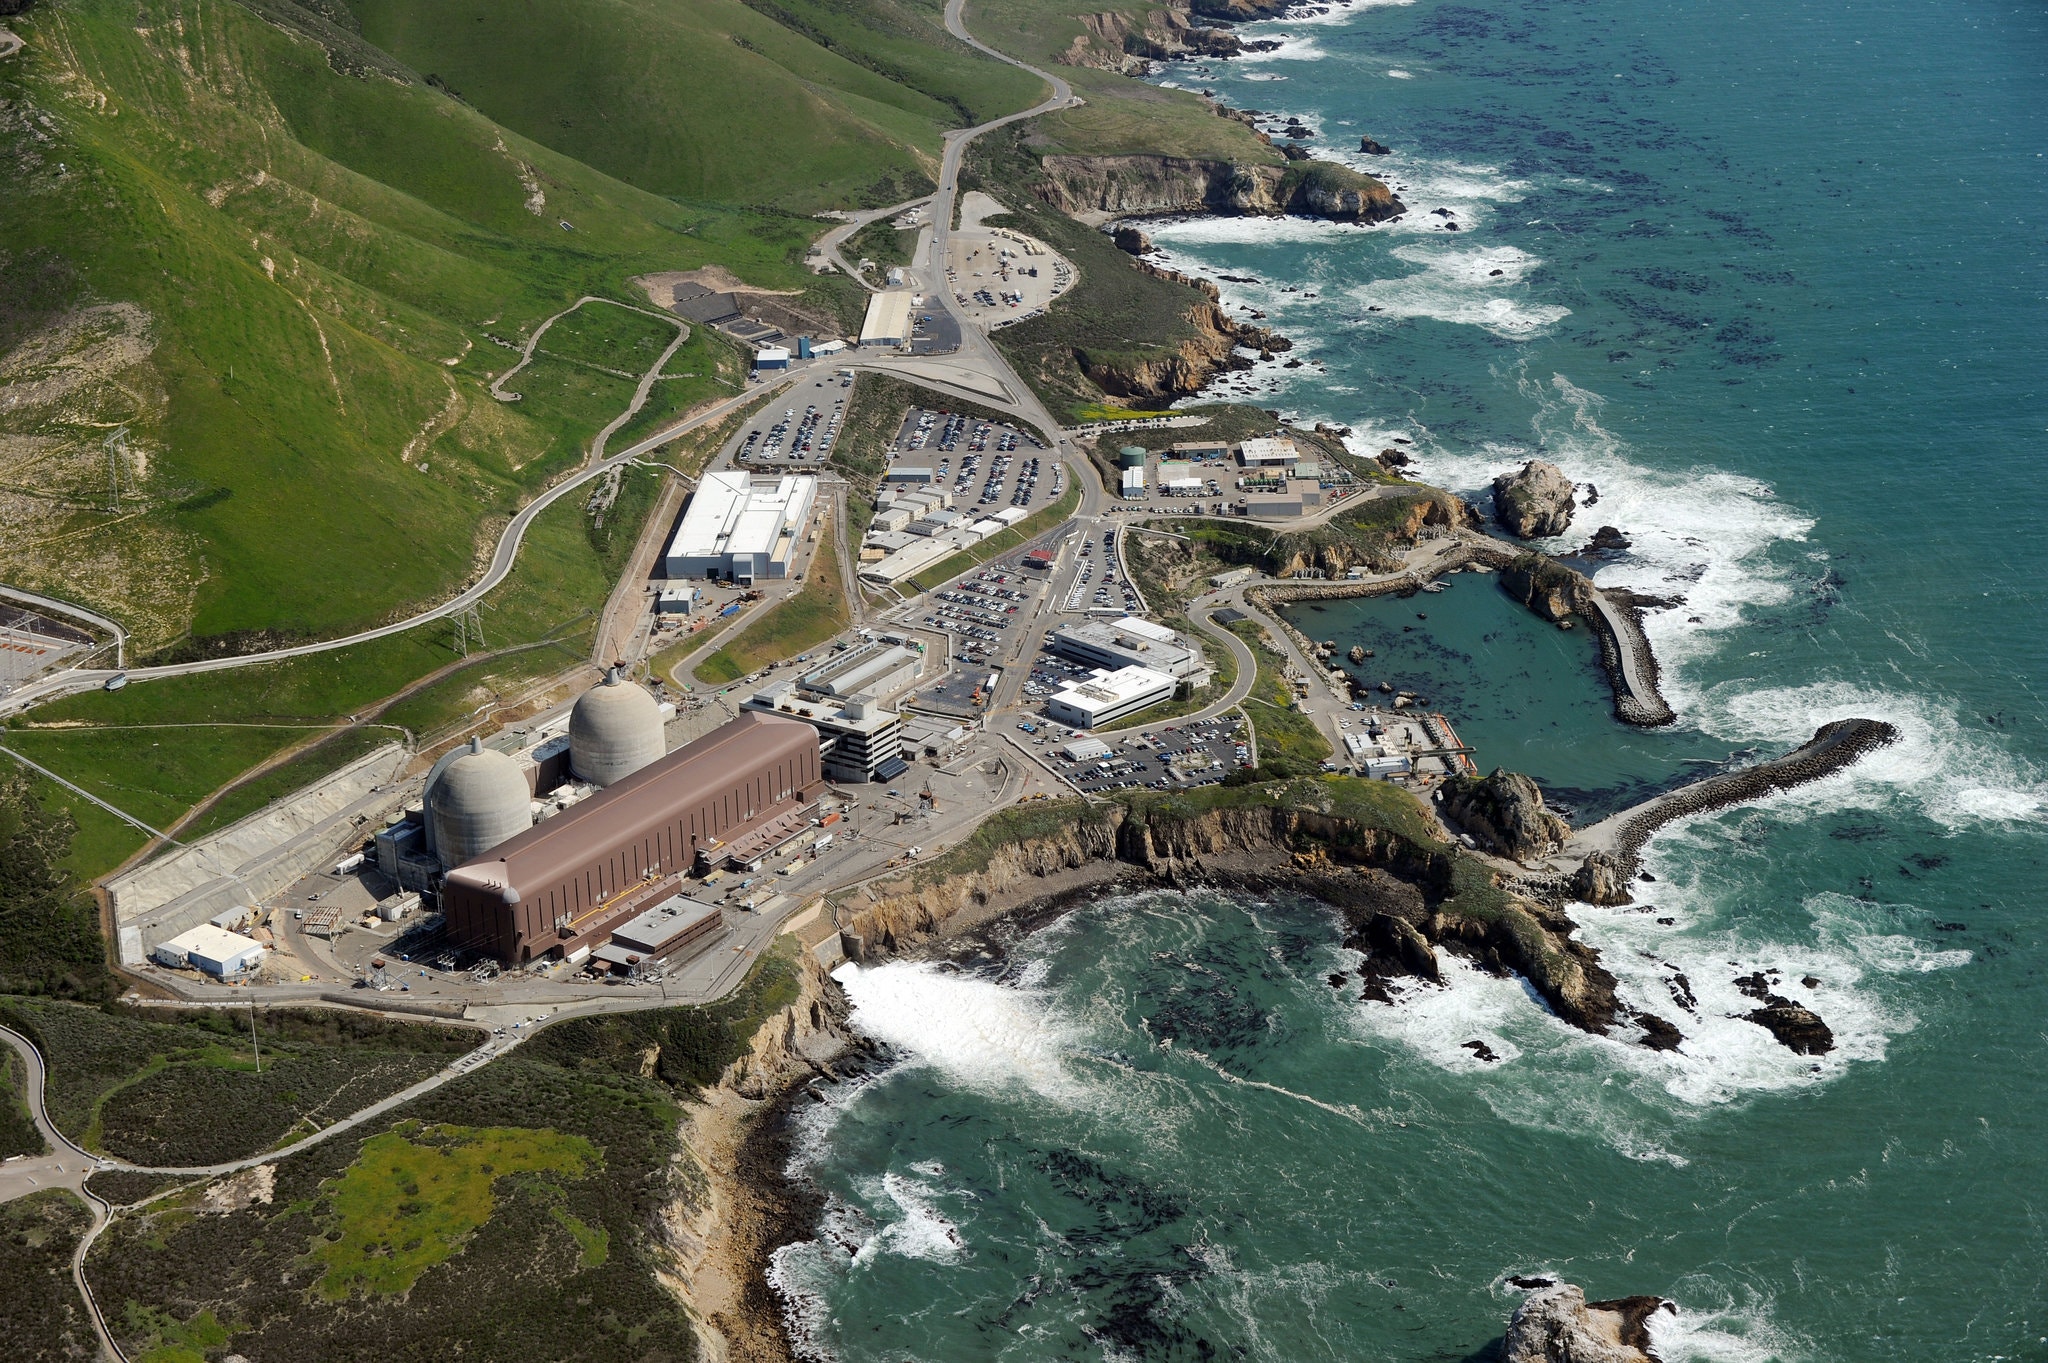 Figure 1. The Diablo Canyon Nuclear Power Plant. Located in San Luis Obispo county, the Diablo Canyon nuclear power plant is the last operating nuclear power plant in California. (Source: The New York Times, 2016)